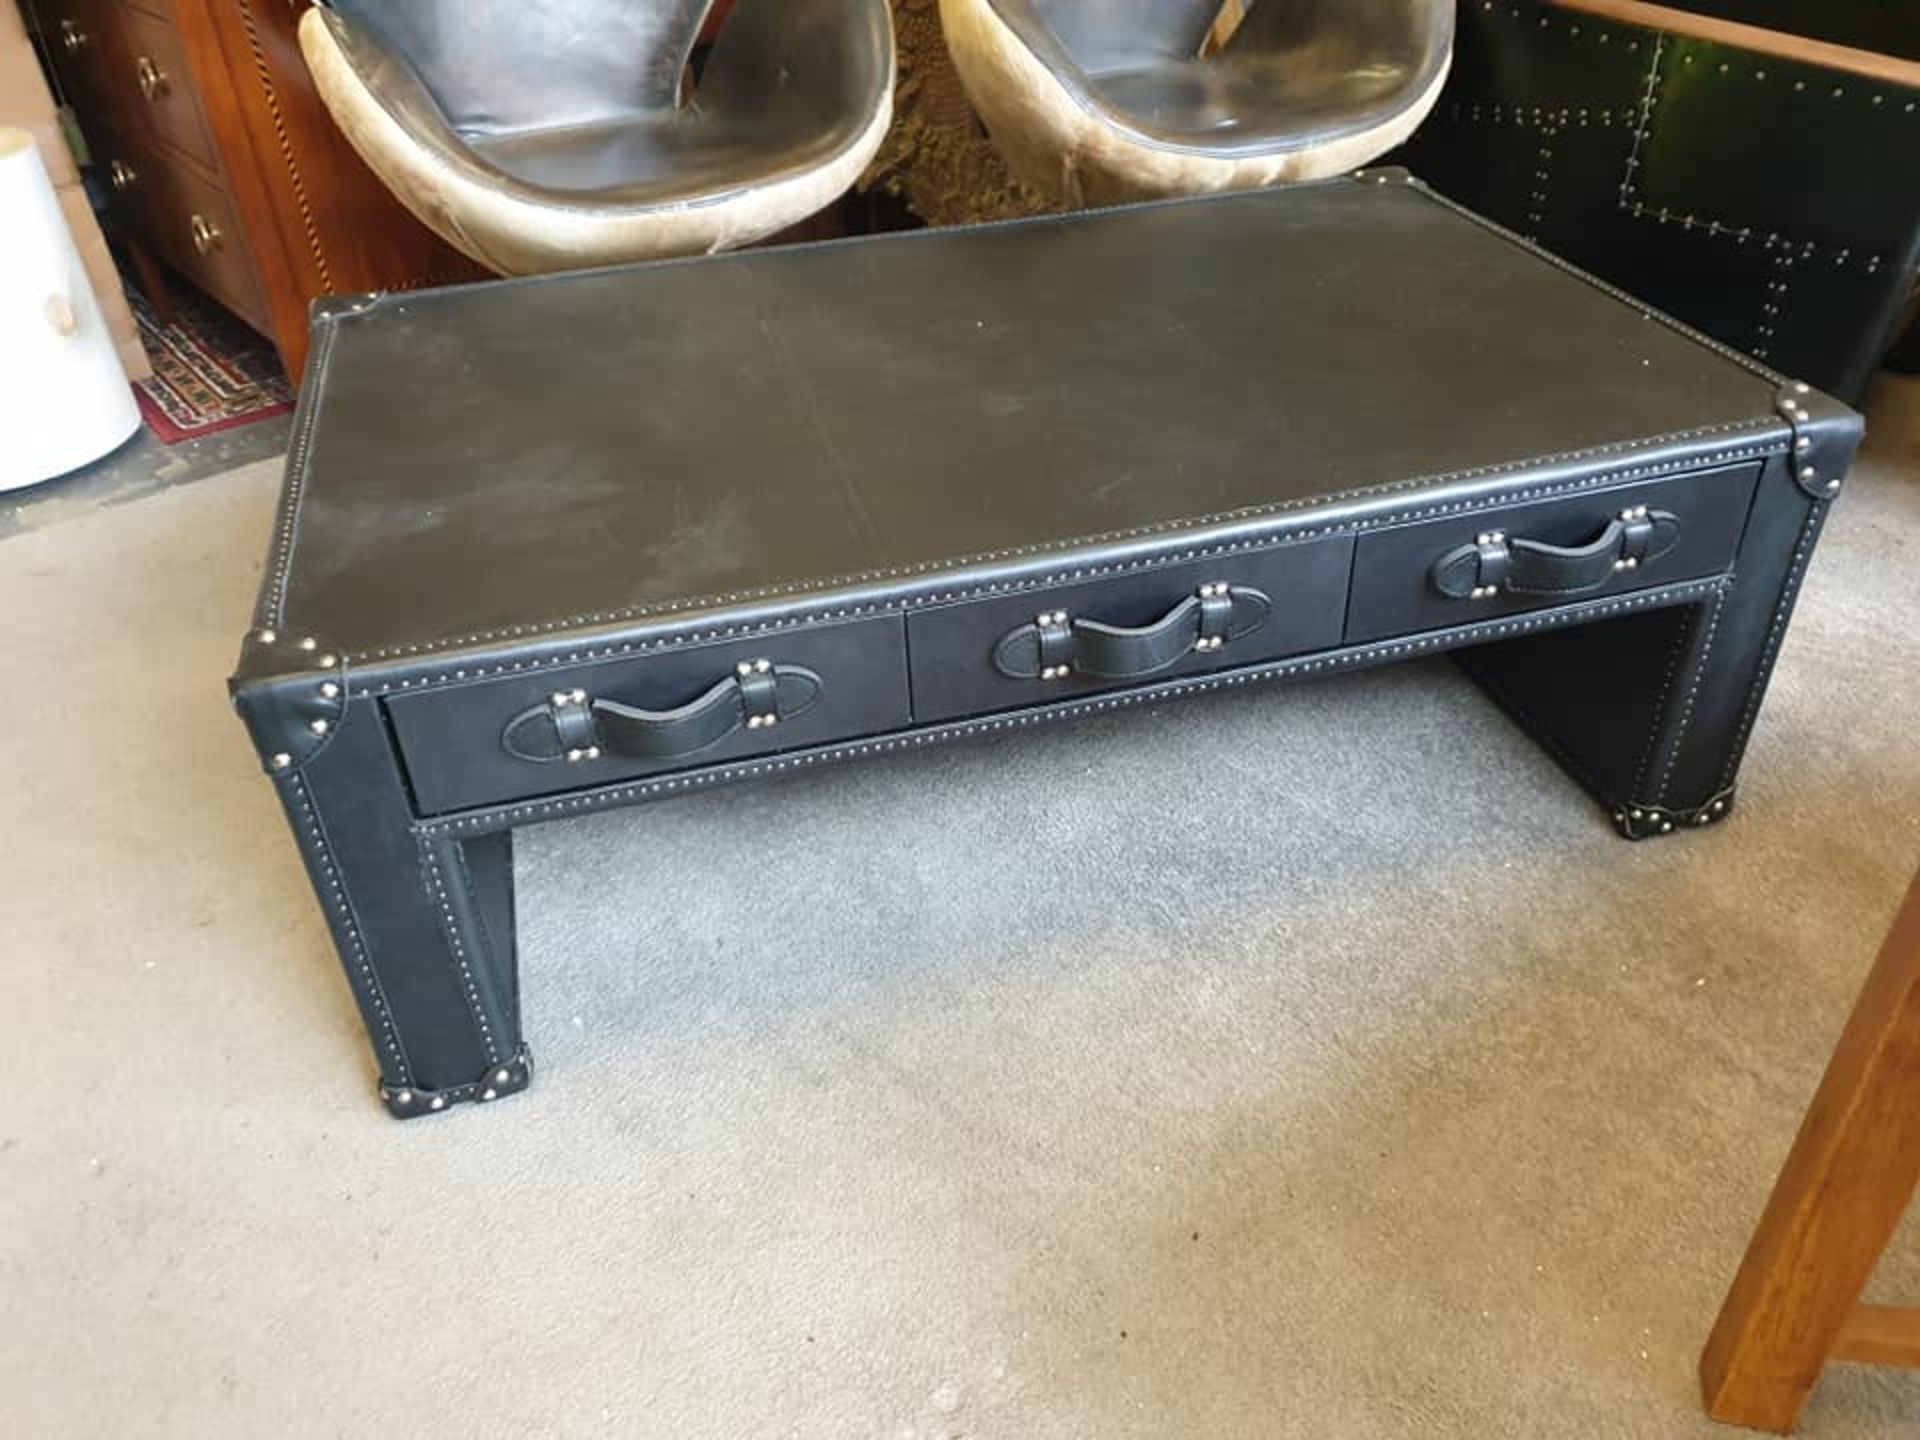 Slab Leather Coffee Table In Napinha Ebony And Black The Timothy Oulton Slab Coffee Table Made Of